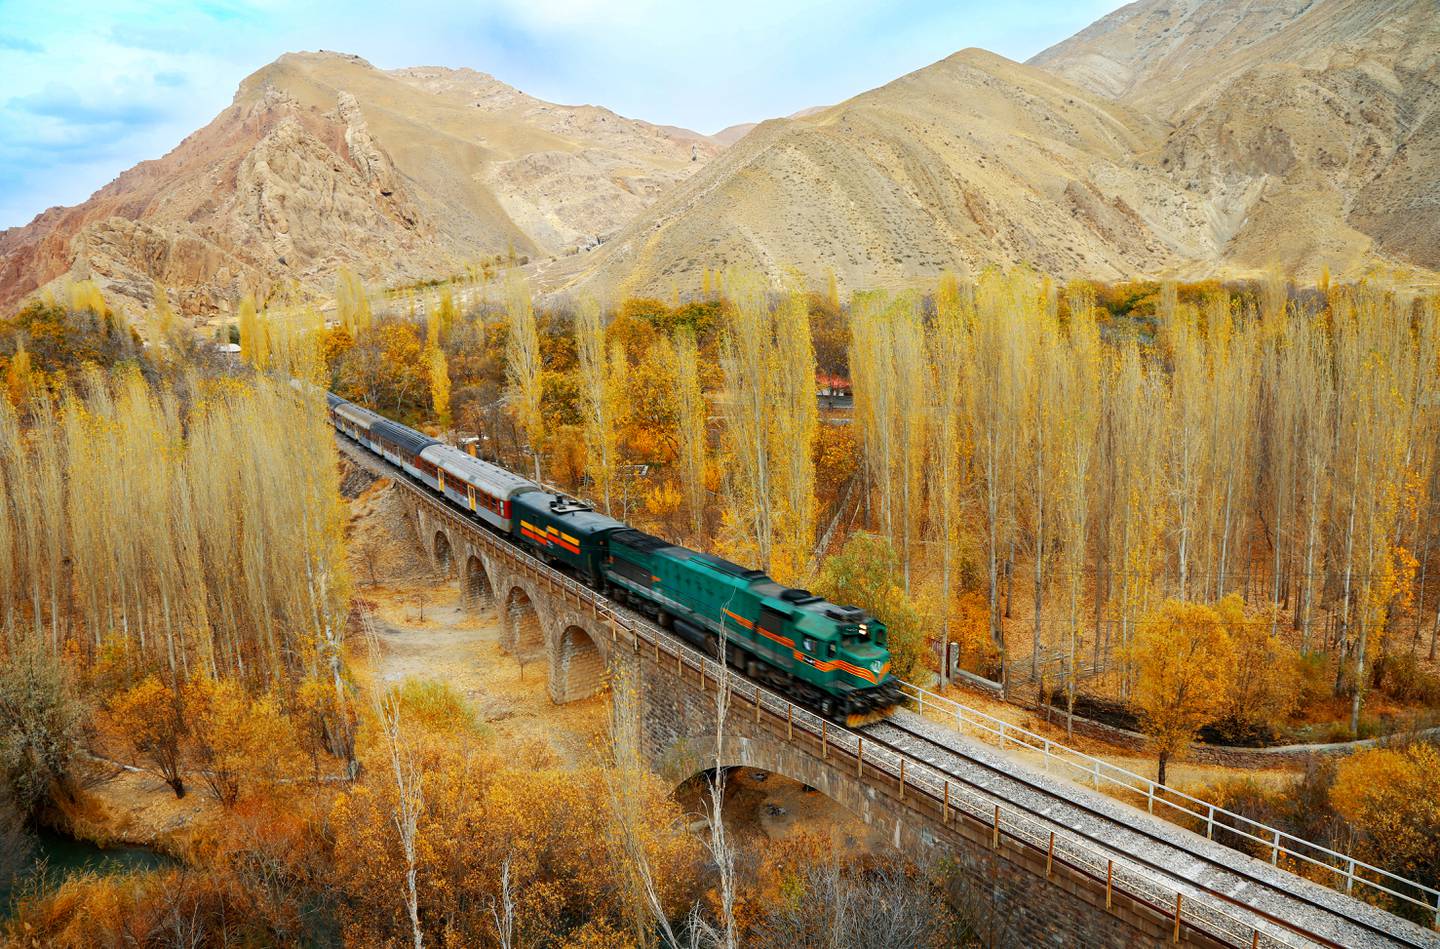 A commuter train on the North line, Zarrindasht-Mahabad route of the Trans-Iranian Railway. GM Locomotive